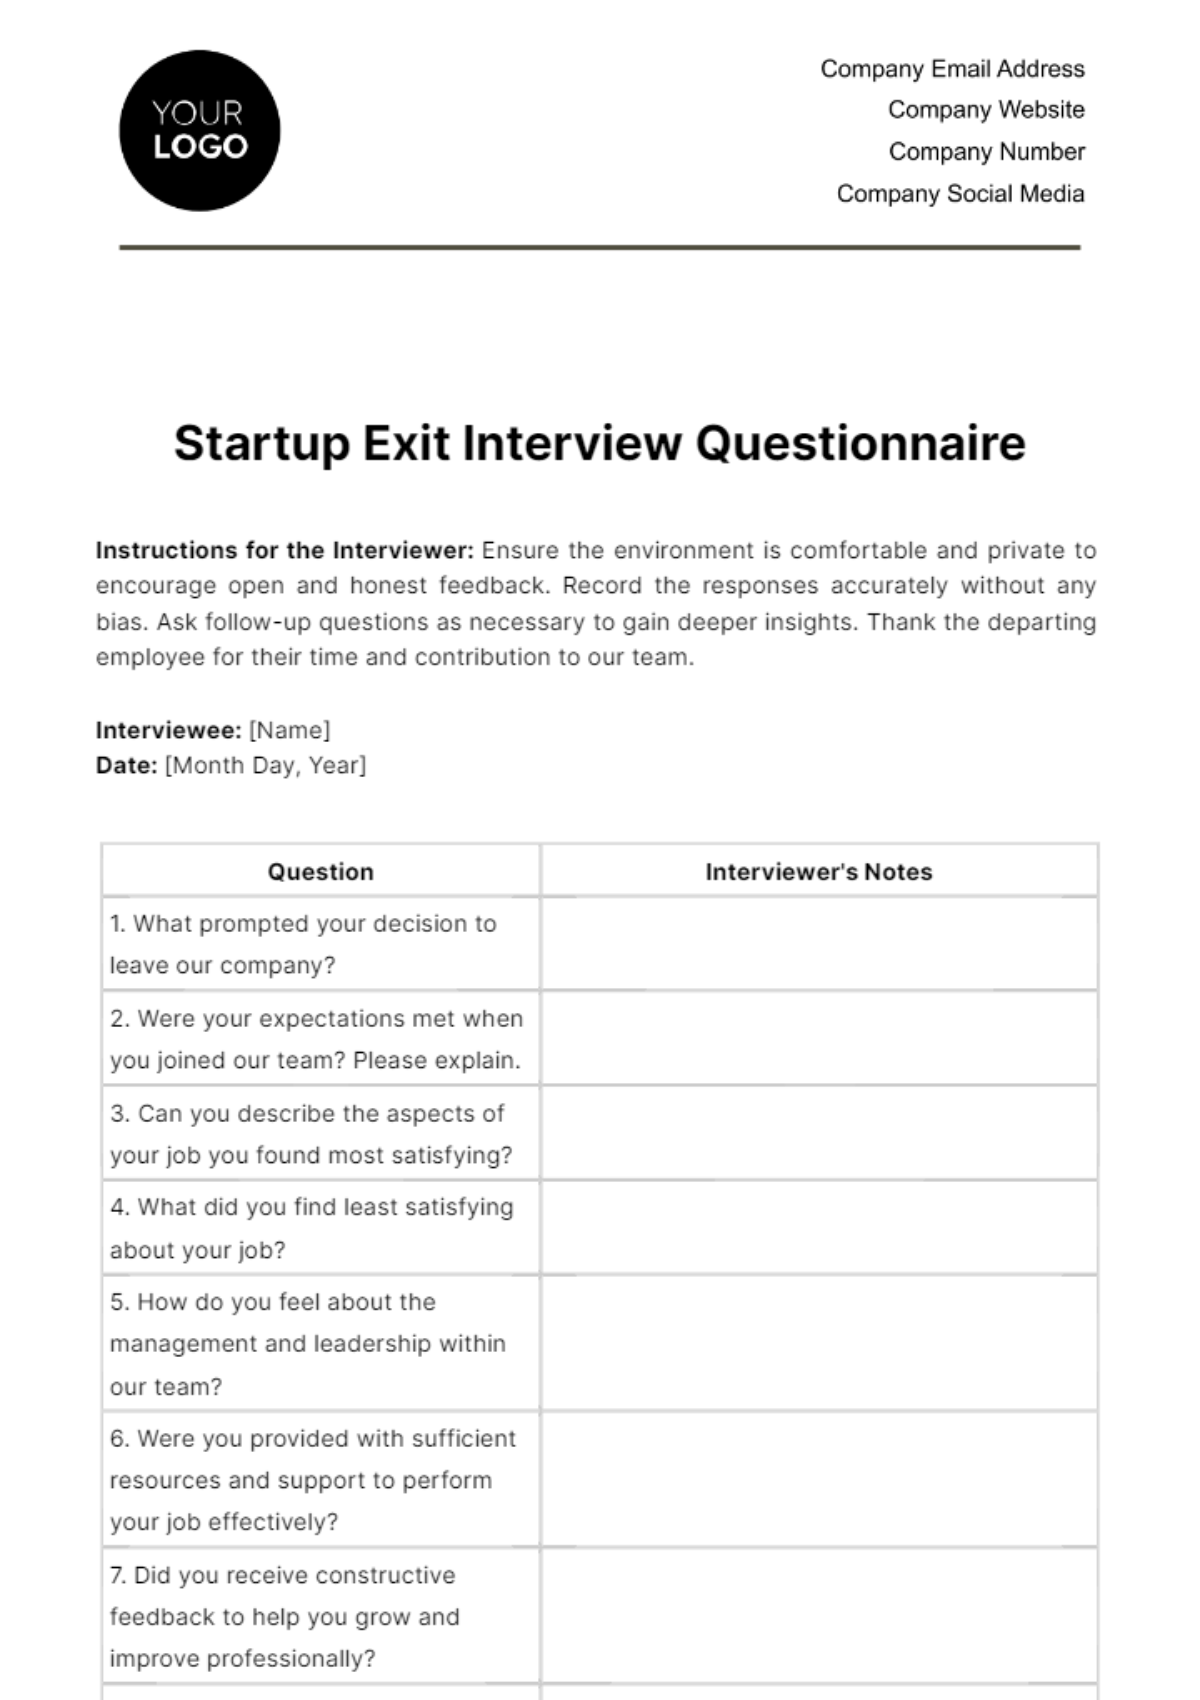 Startup Exit Interview Questionnaire Template